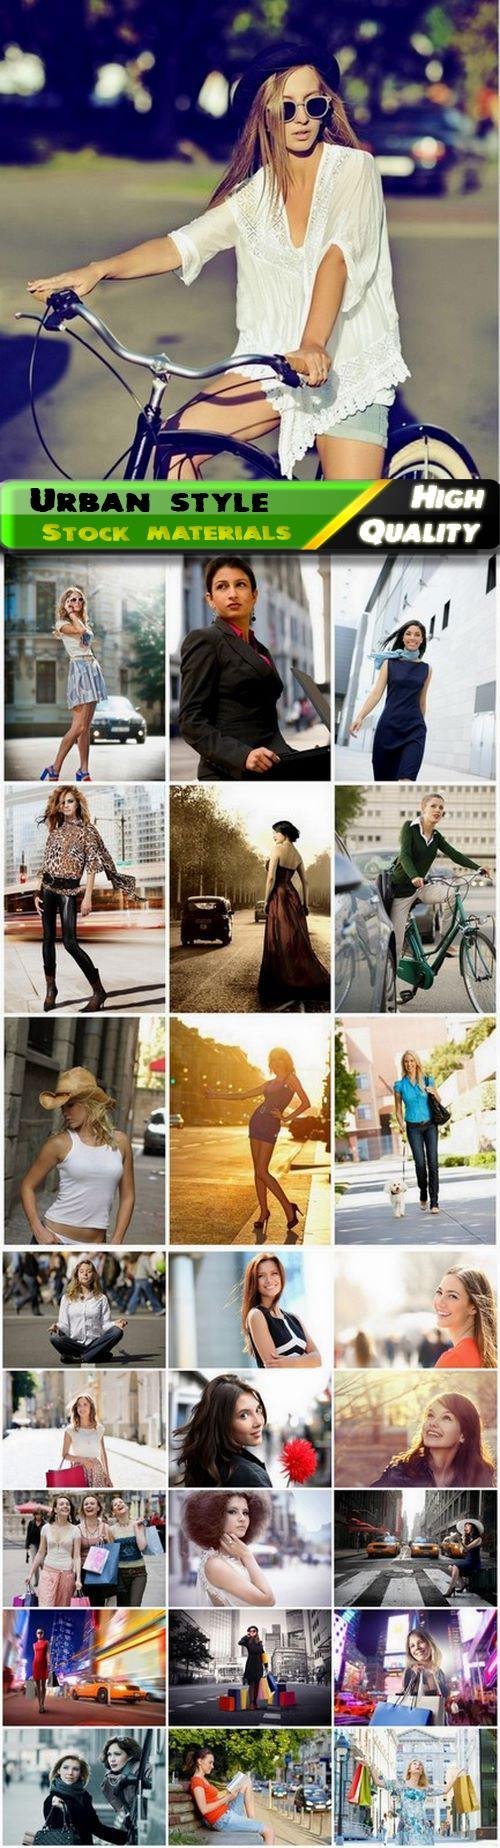 Fashionable women in urban style and girl on city street - 25 HQ Jpg